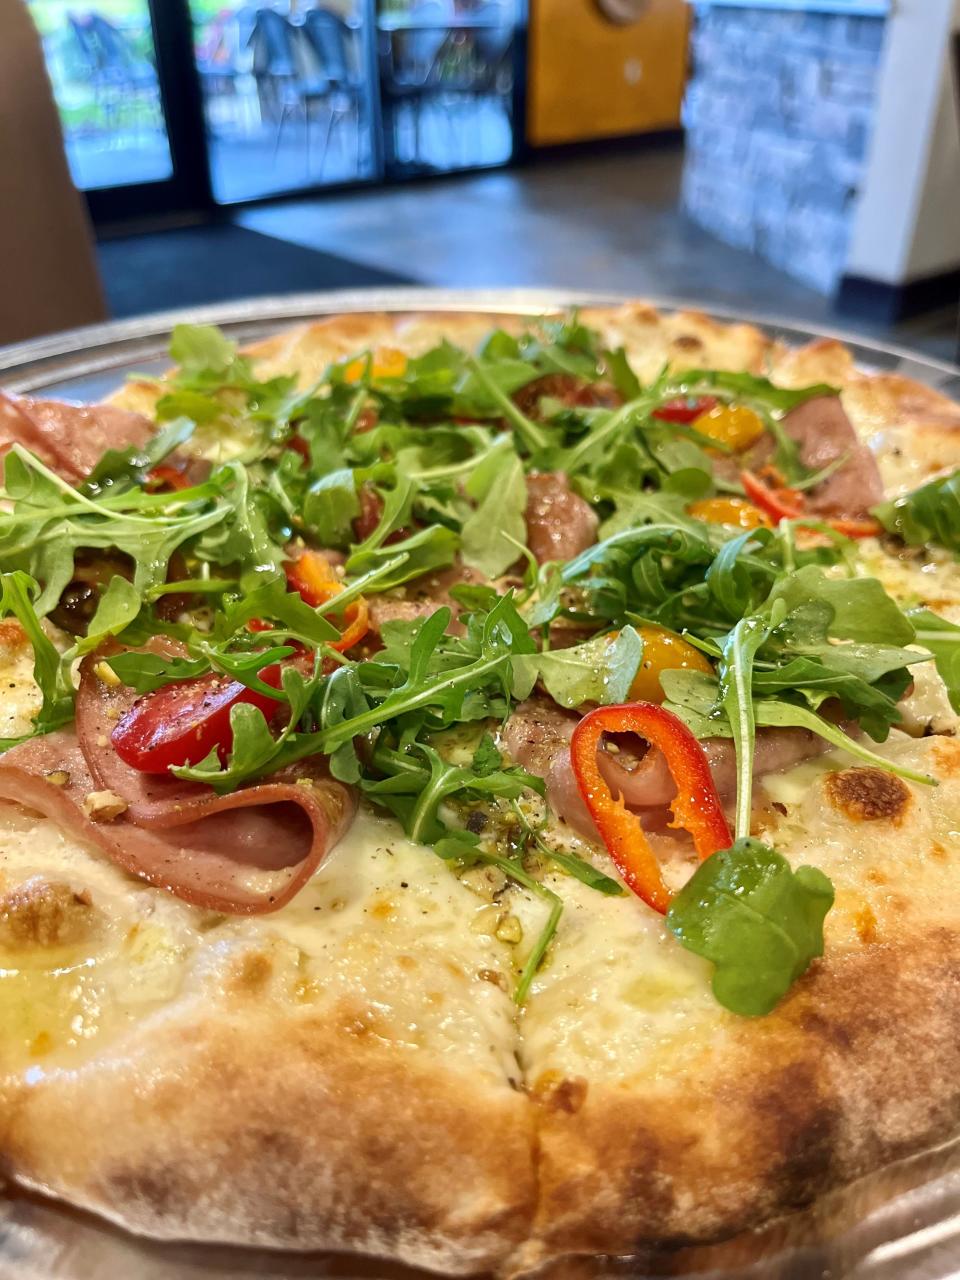 Oda Pizzeria Bistro has a variety of specialty wood fire pizzas, including this mortadella.